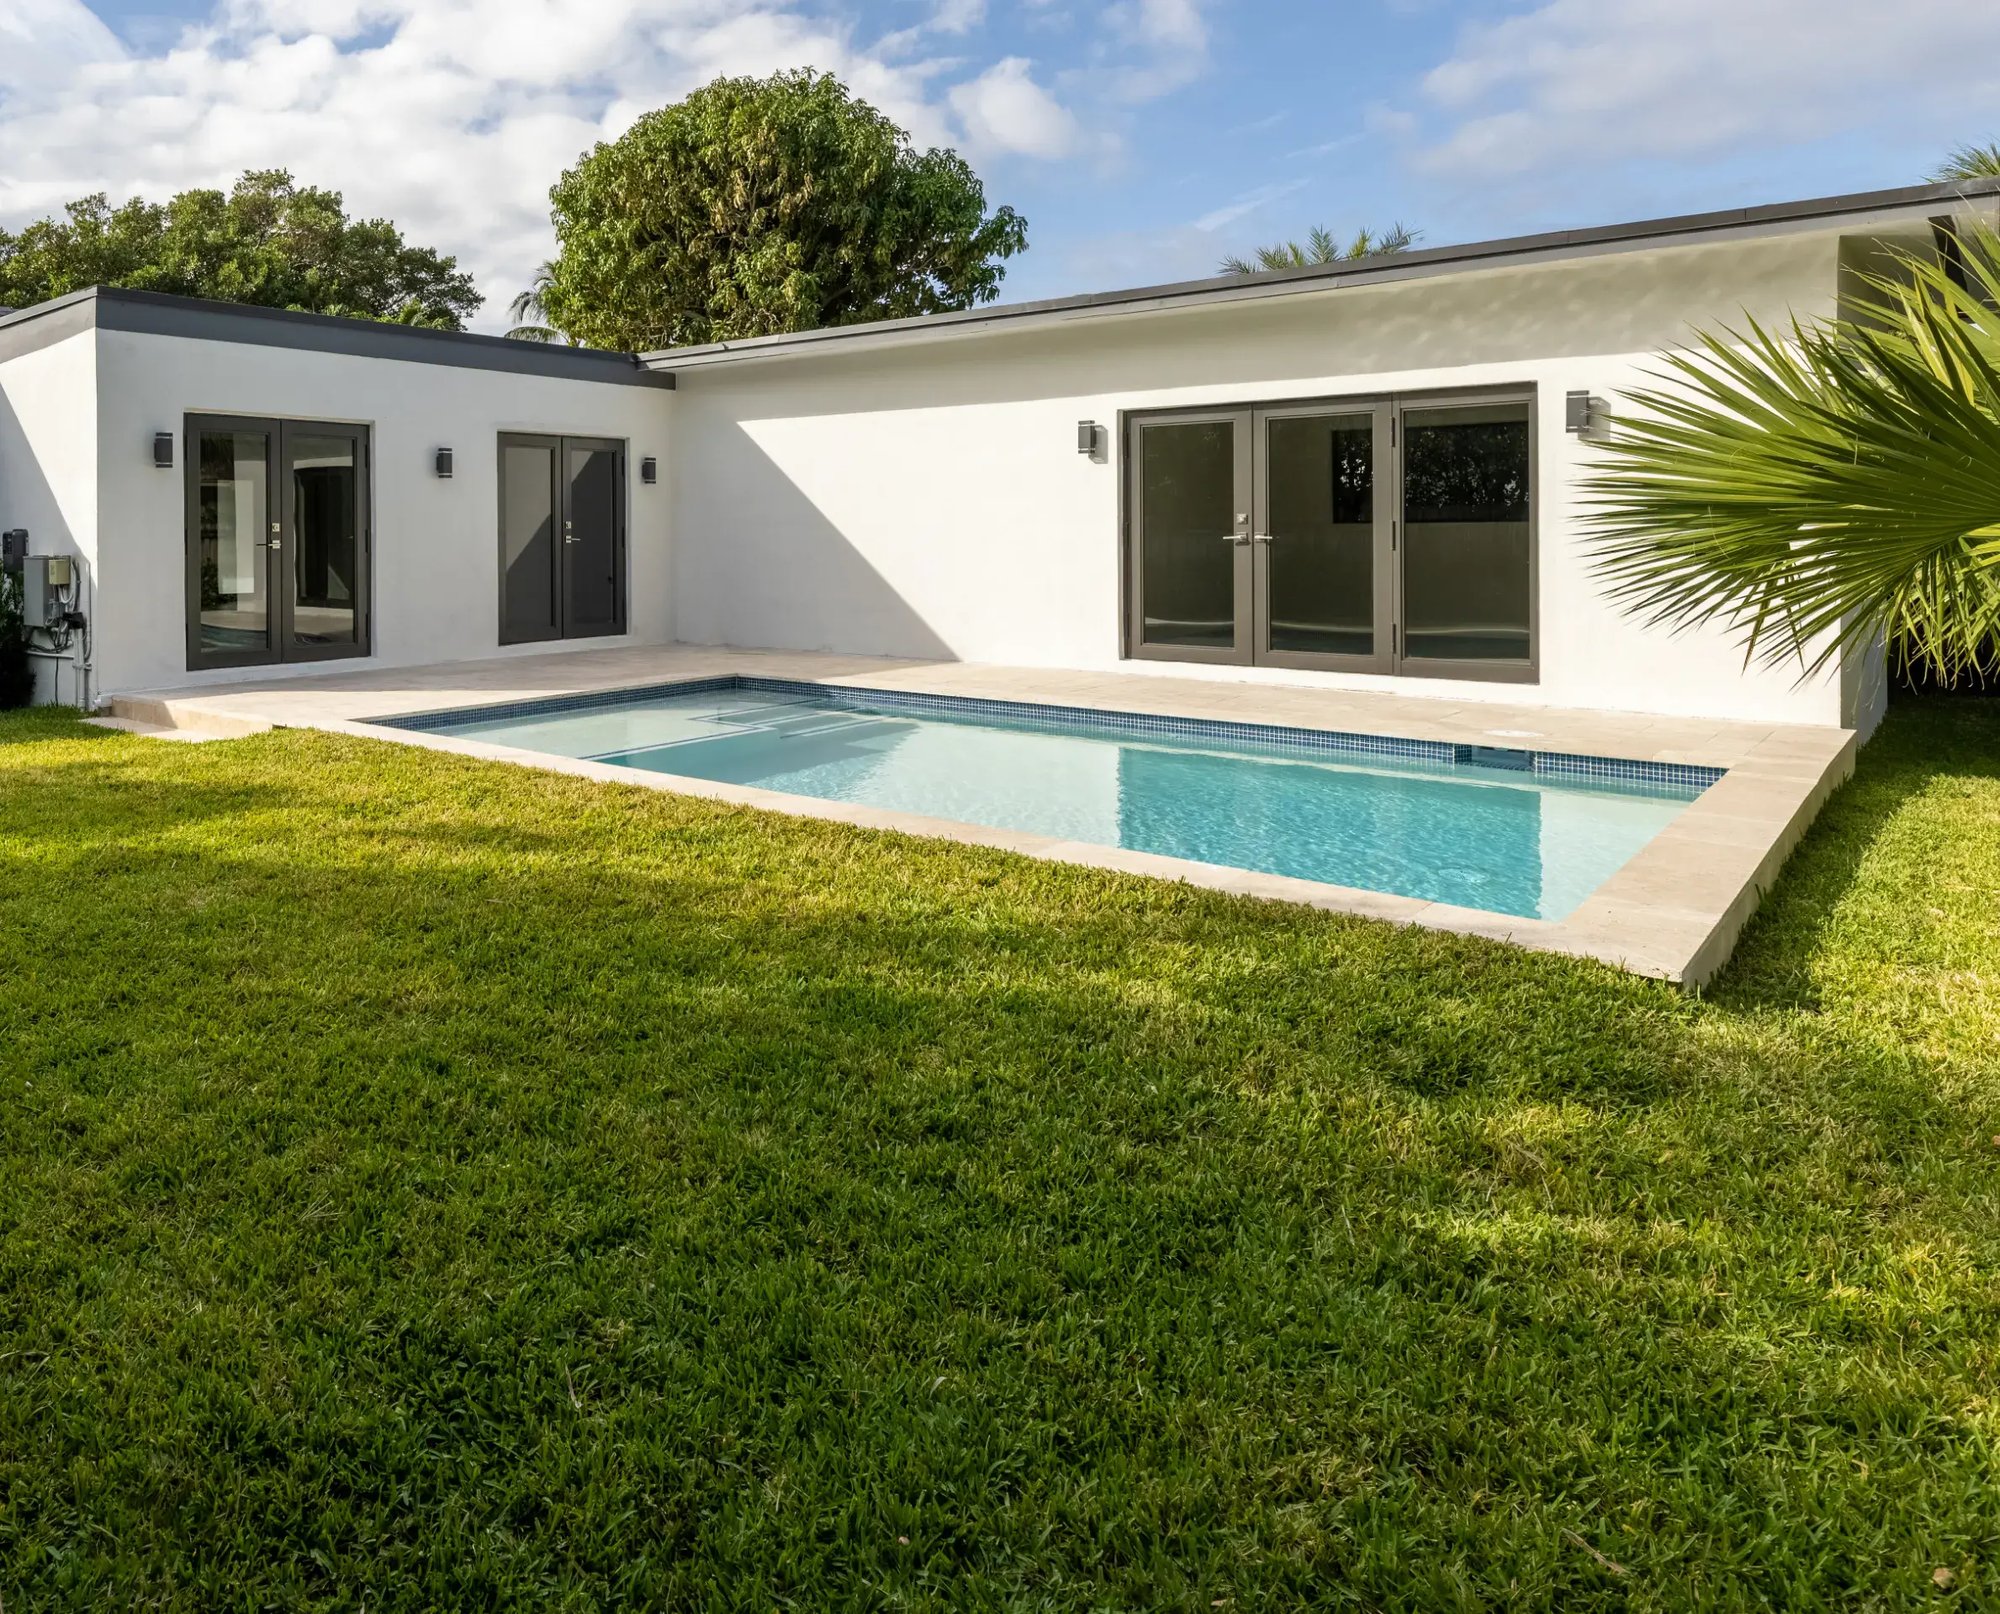 A stunning modern home featuring a refreshing fibreglass pool and lush green grass, perfect for relaxation and outdoor gatherings.